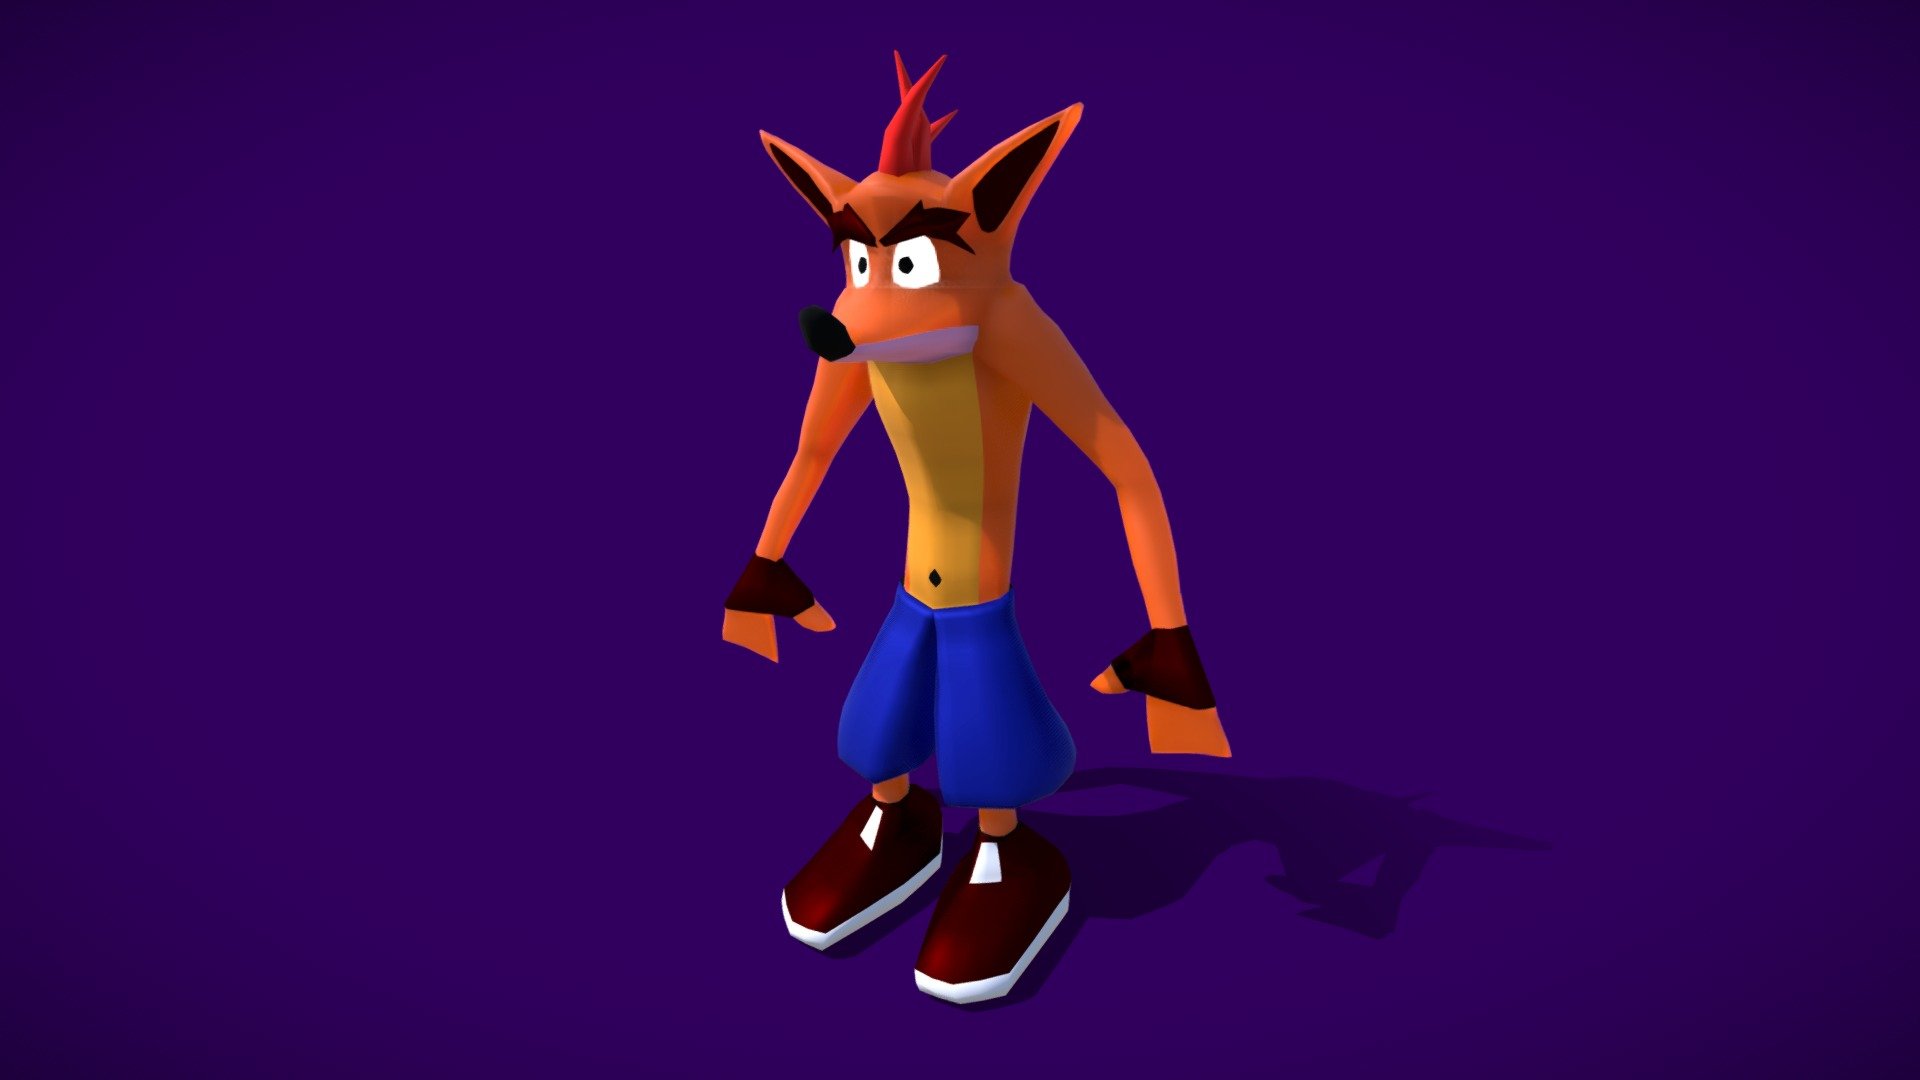 WOAH
ITS YOUR FAVORITE BANDICOOT
AND HE IS BACK
FROM 96

Made with Crash Bandicoot first models as reference - Crash Bandicoot - Buy Royalty Free 3D model by Felipe Eller (@Pazzarote) 3d model